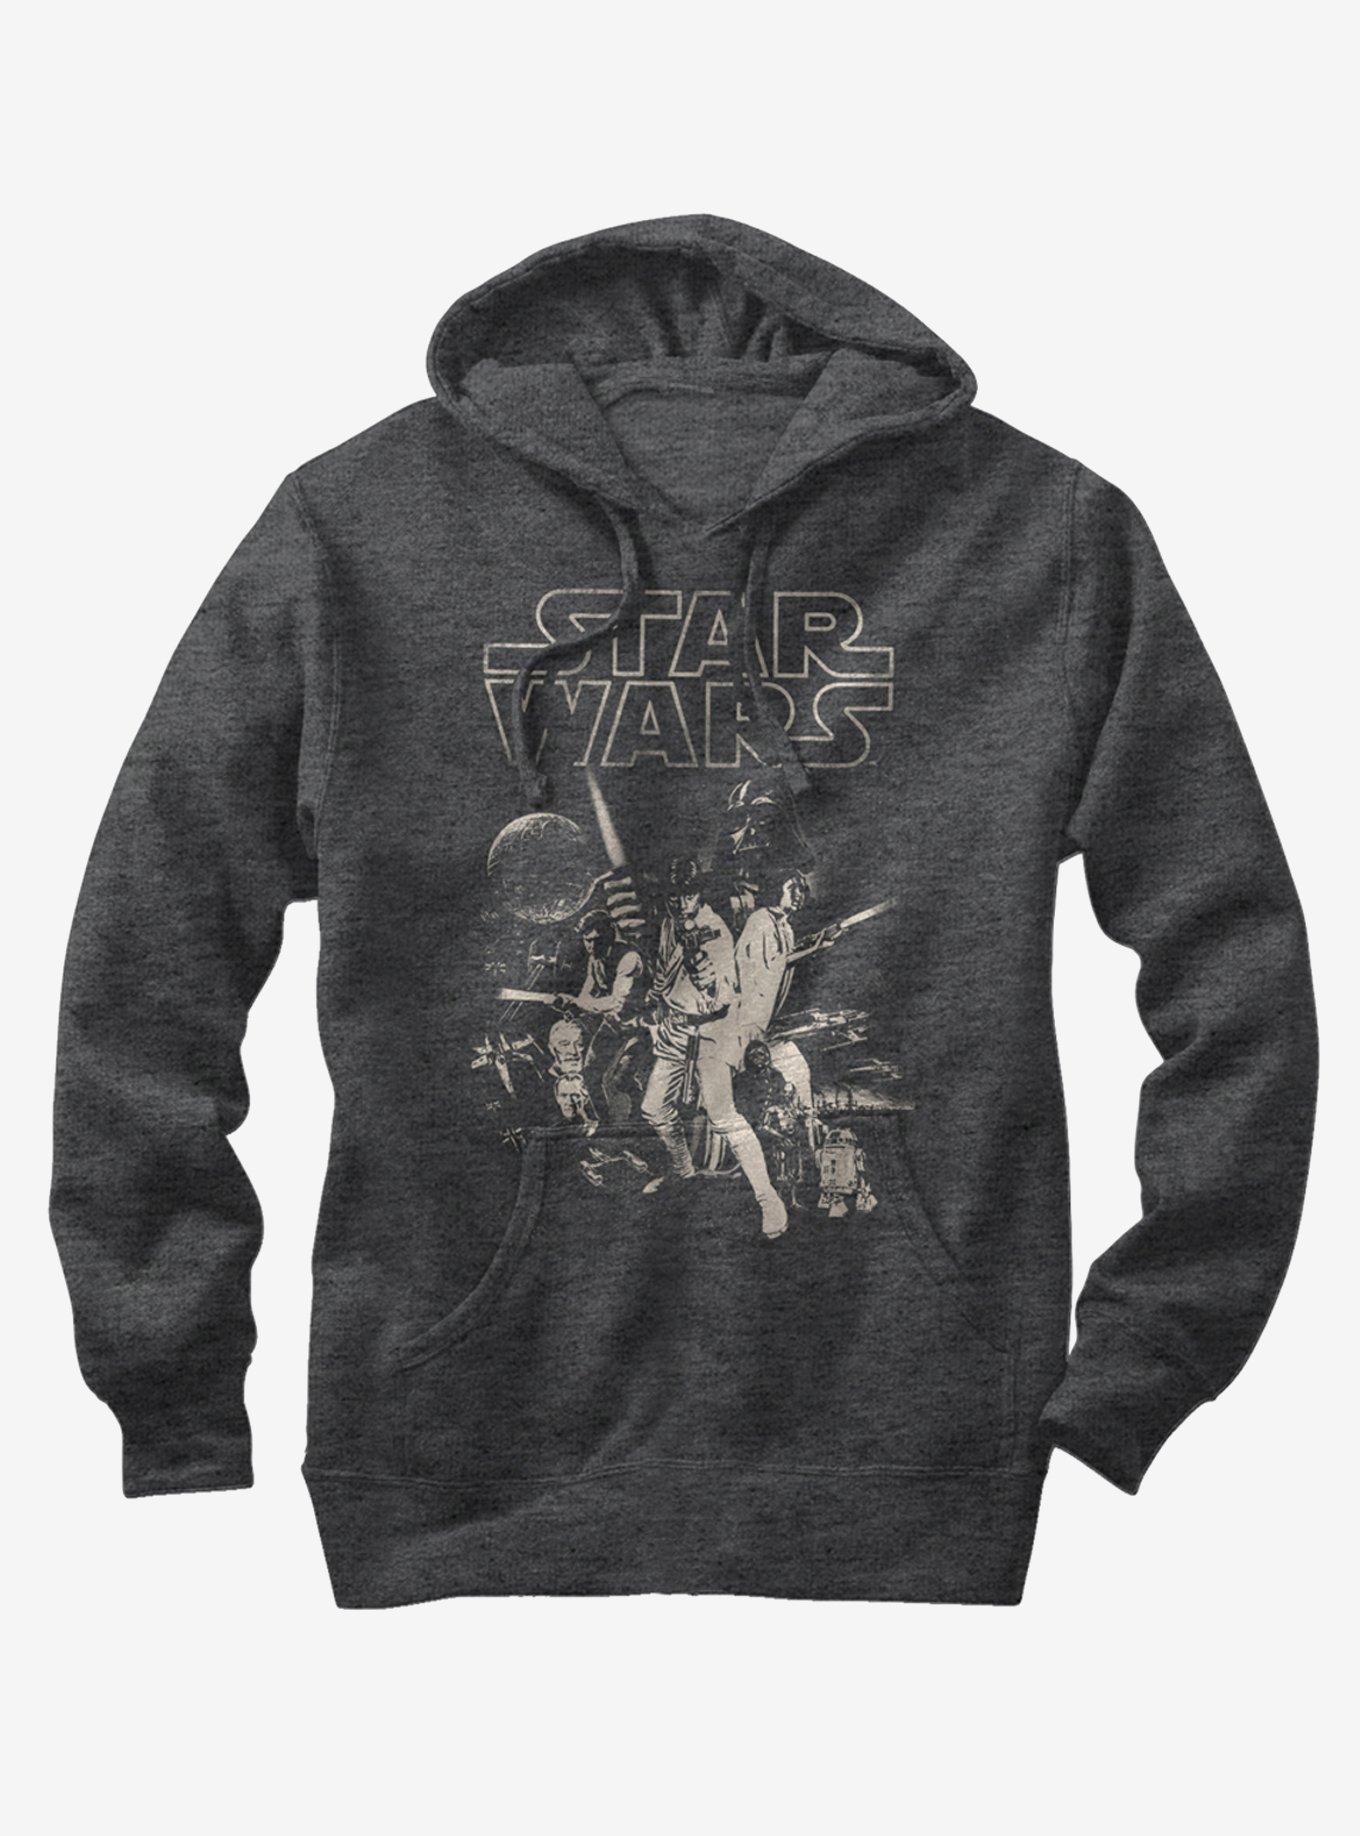 Star Wars Classic Poster Hoodie, CHAR HTR, hi-res